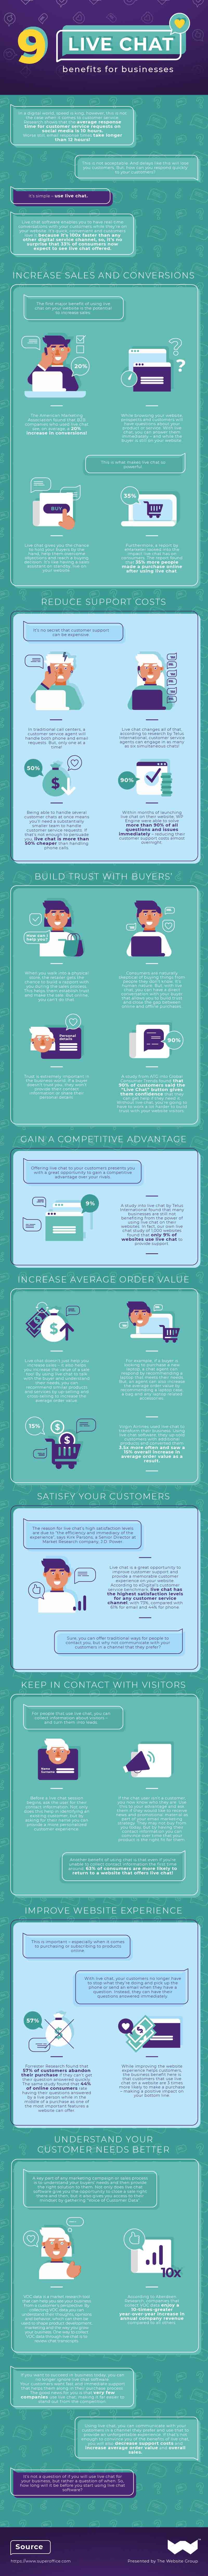 9-livechat-benefits-for-businesses-infographic-1